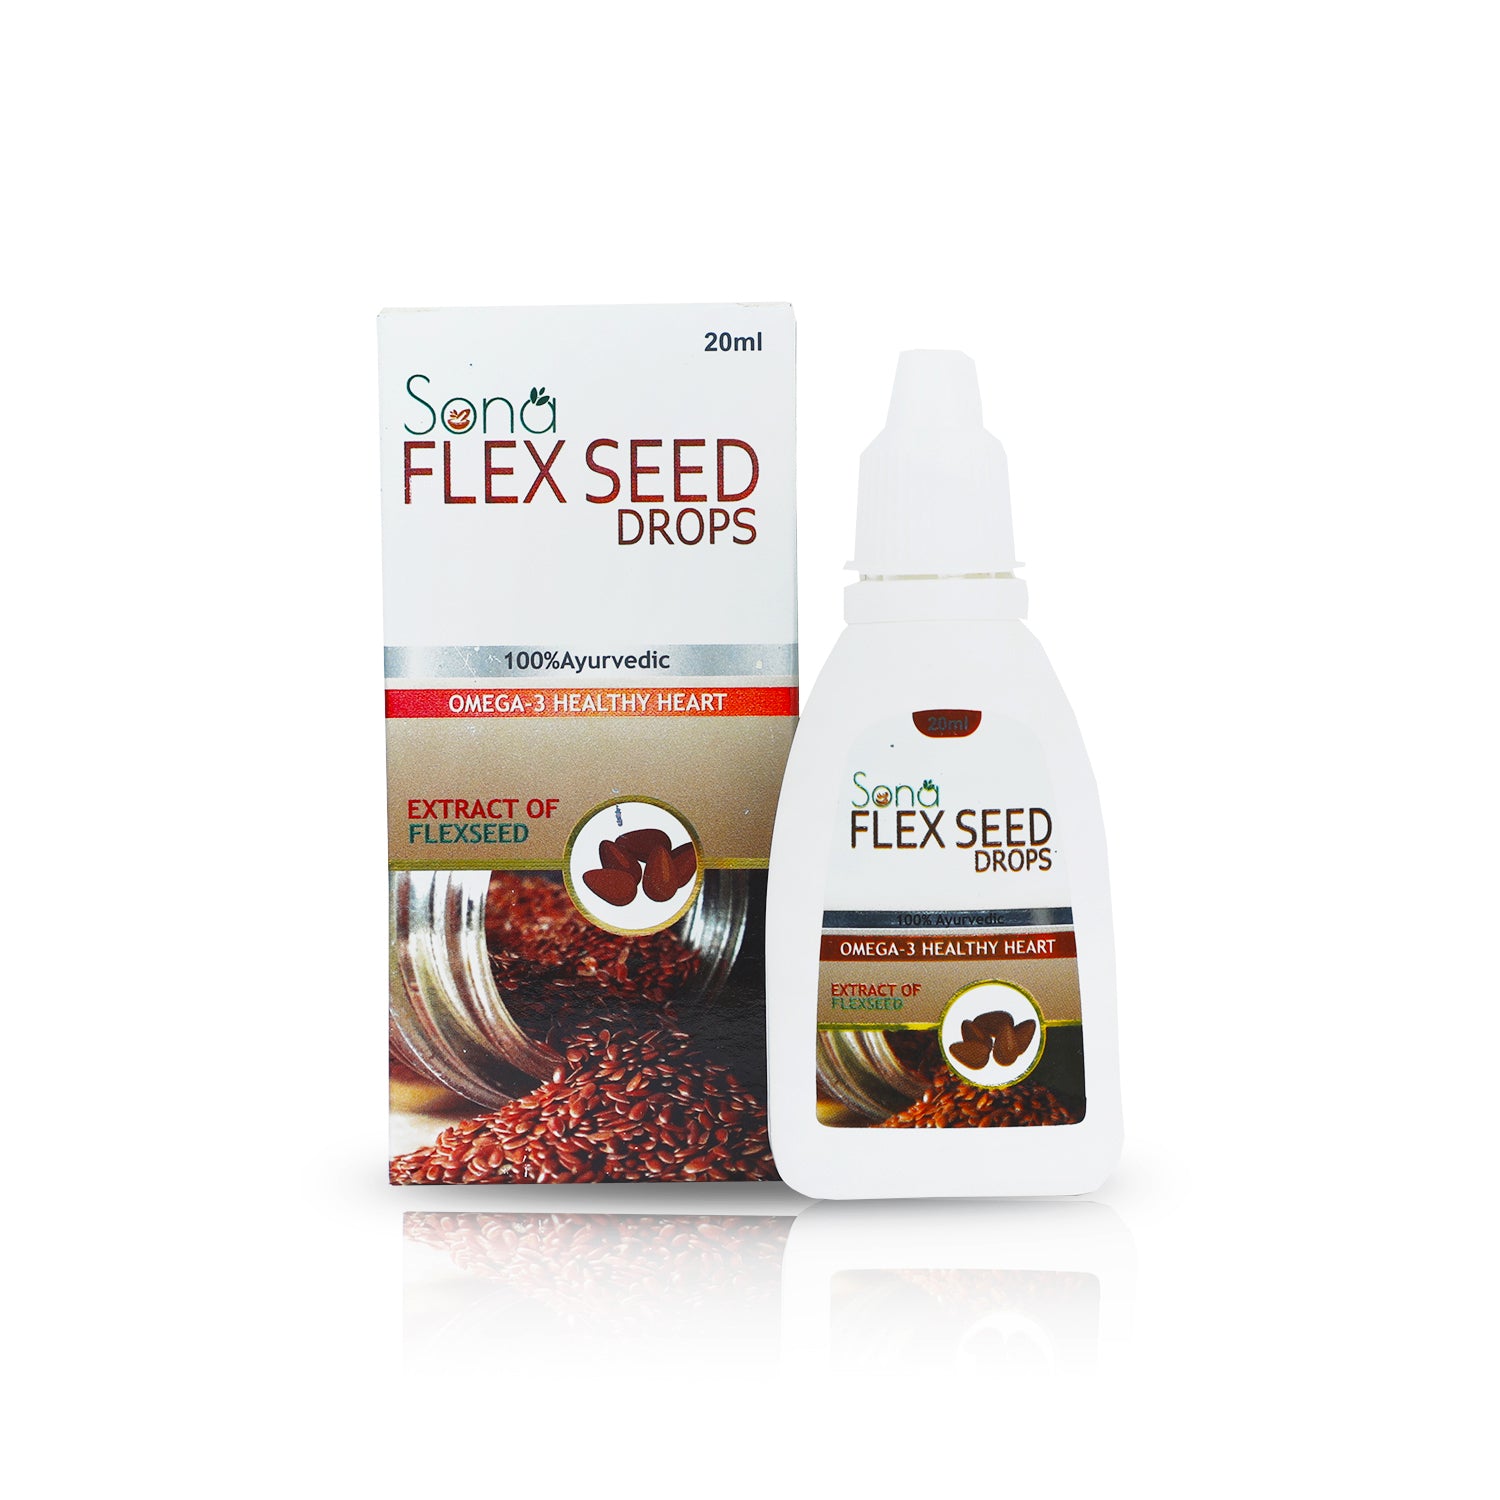 Sona Flex Seed  Drop Omega-3 For Healthy heart (Pack of 1)